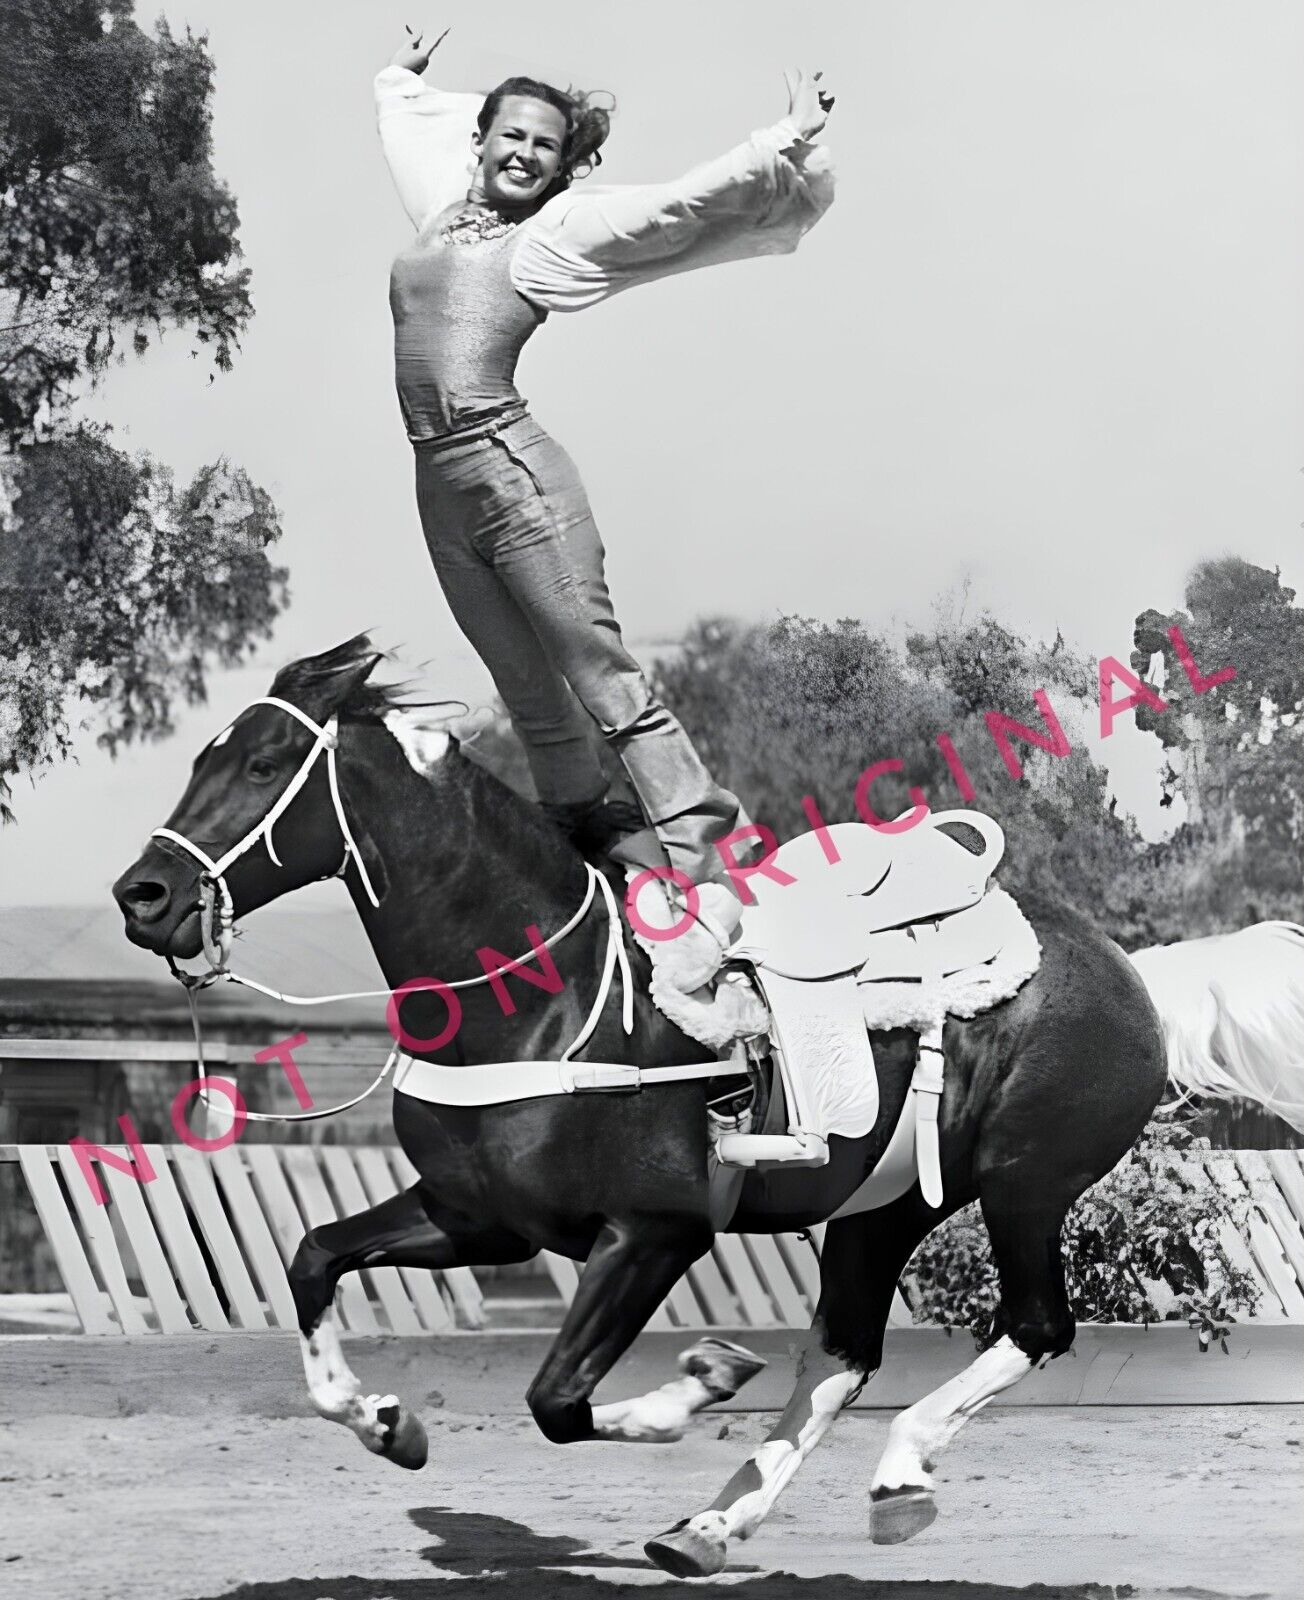 8x10 Vintage Photo High Def Reprint of Woman Trick Rider on Horse Stunt Riding